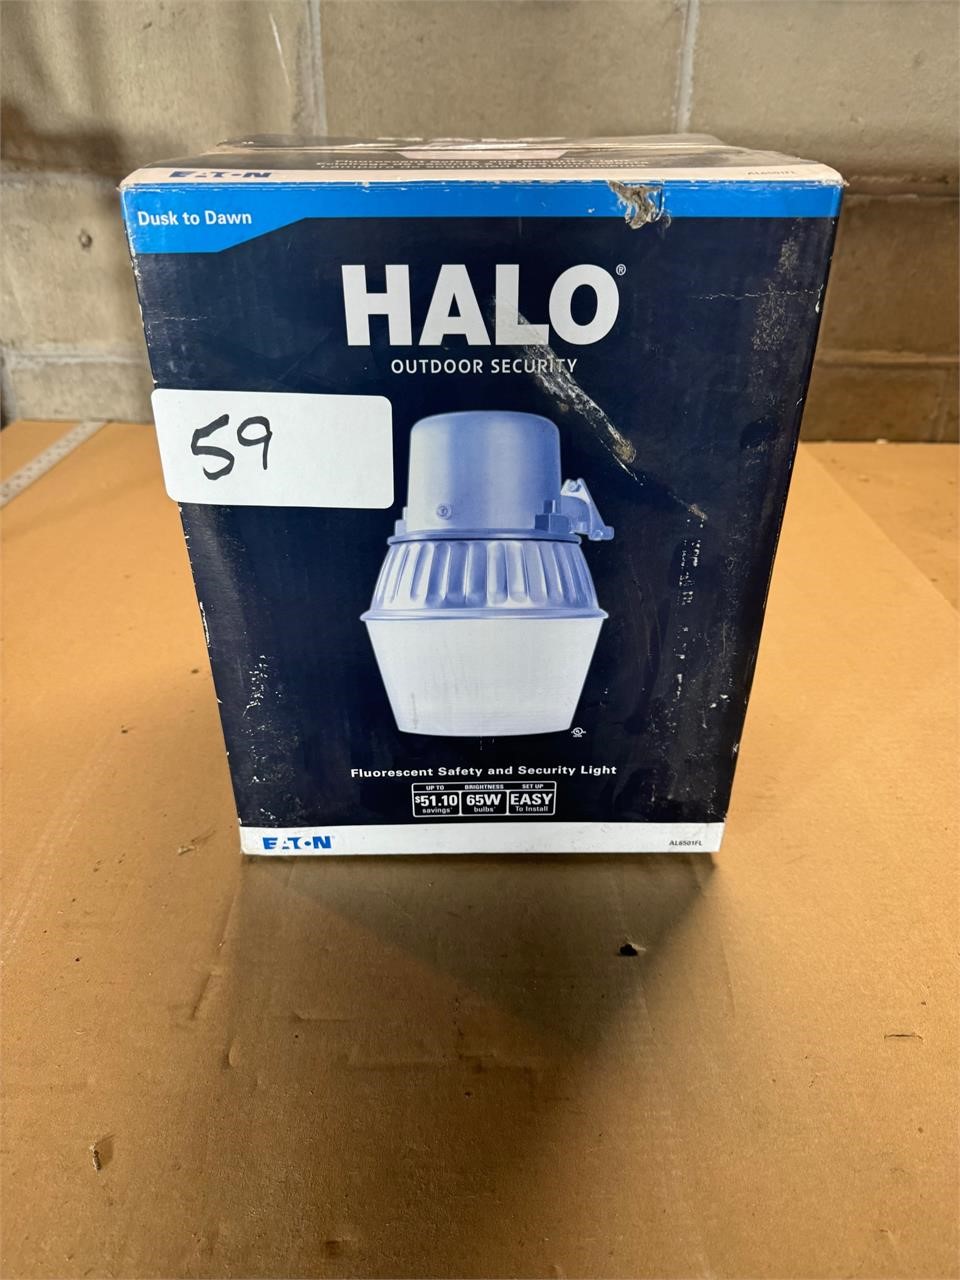 Halo outdoor security light brand new